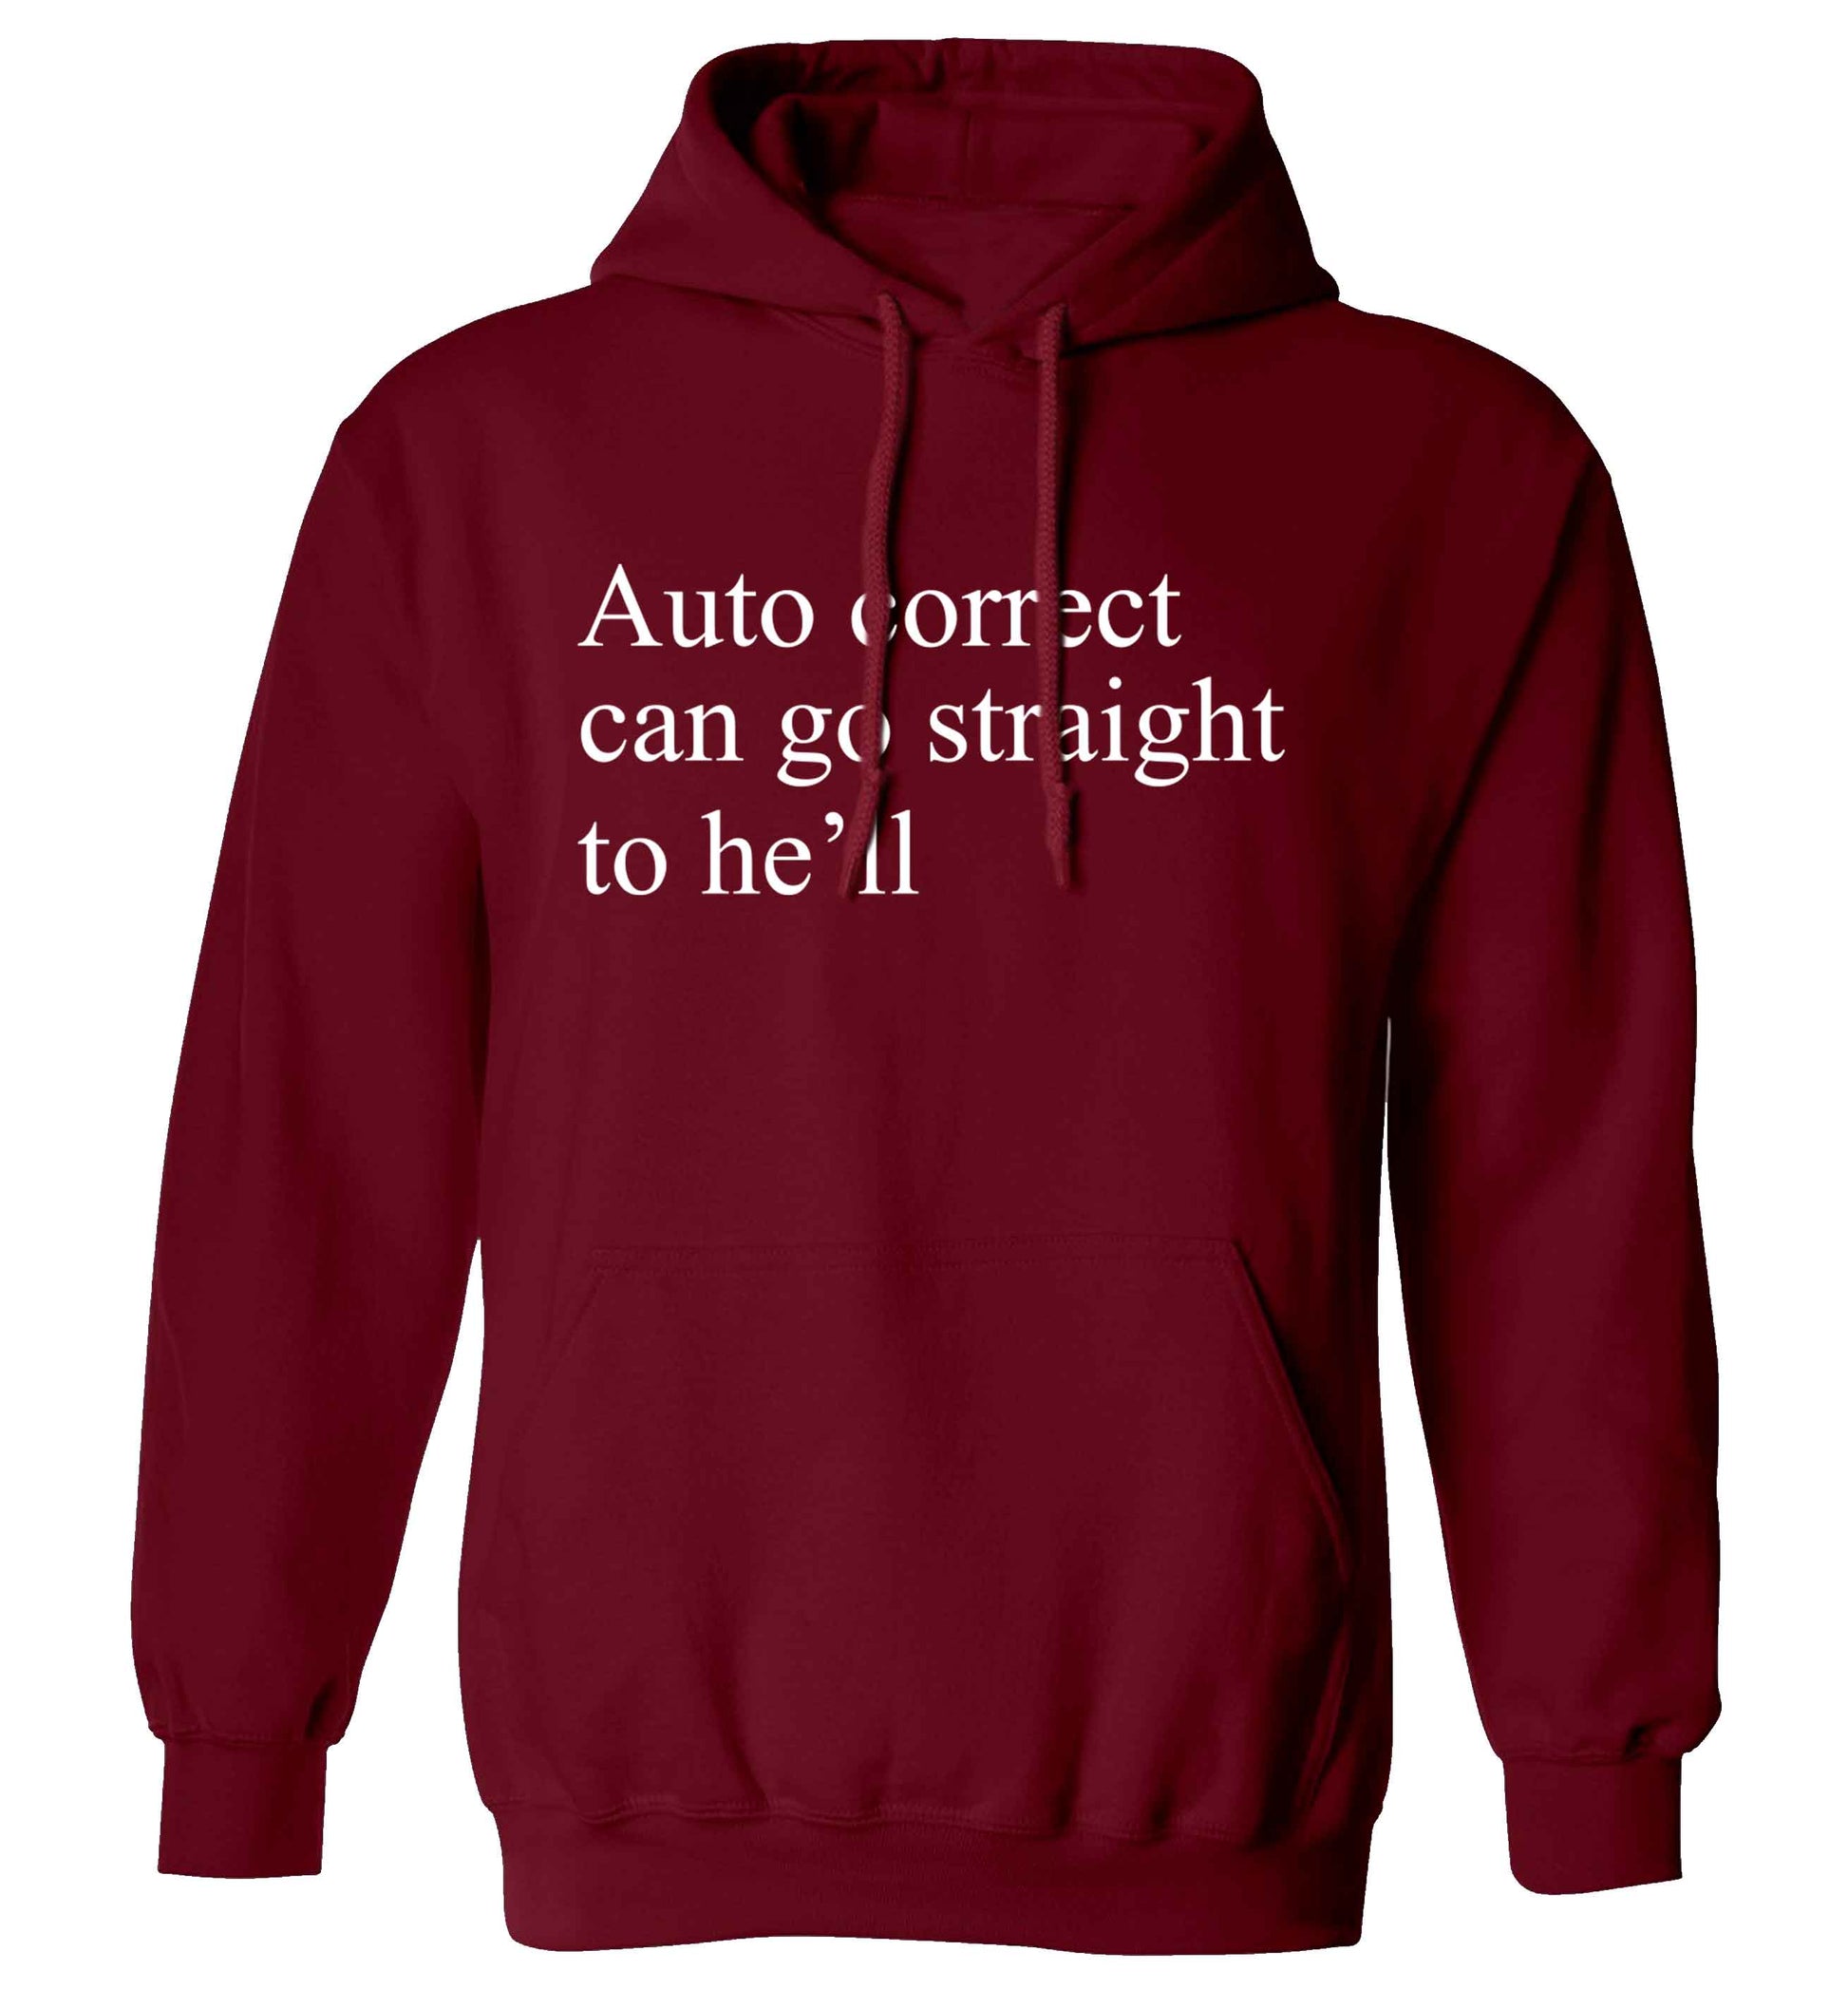 Auto correct can go straight to he'll adults unisex maroon hoodie 2XL